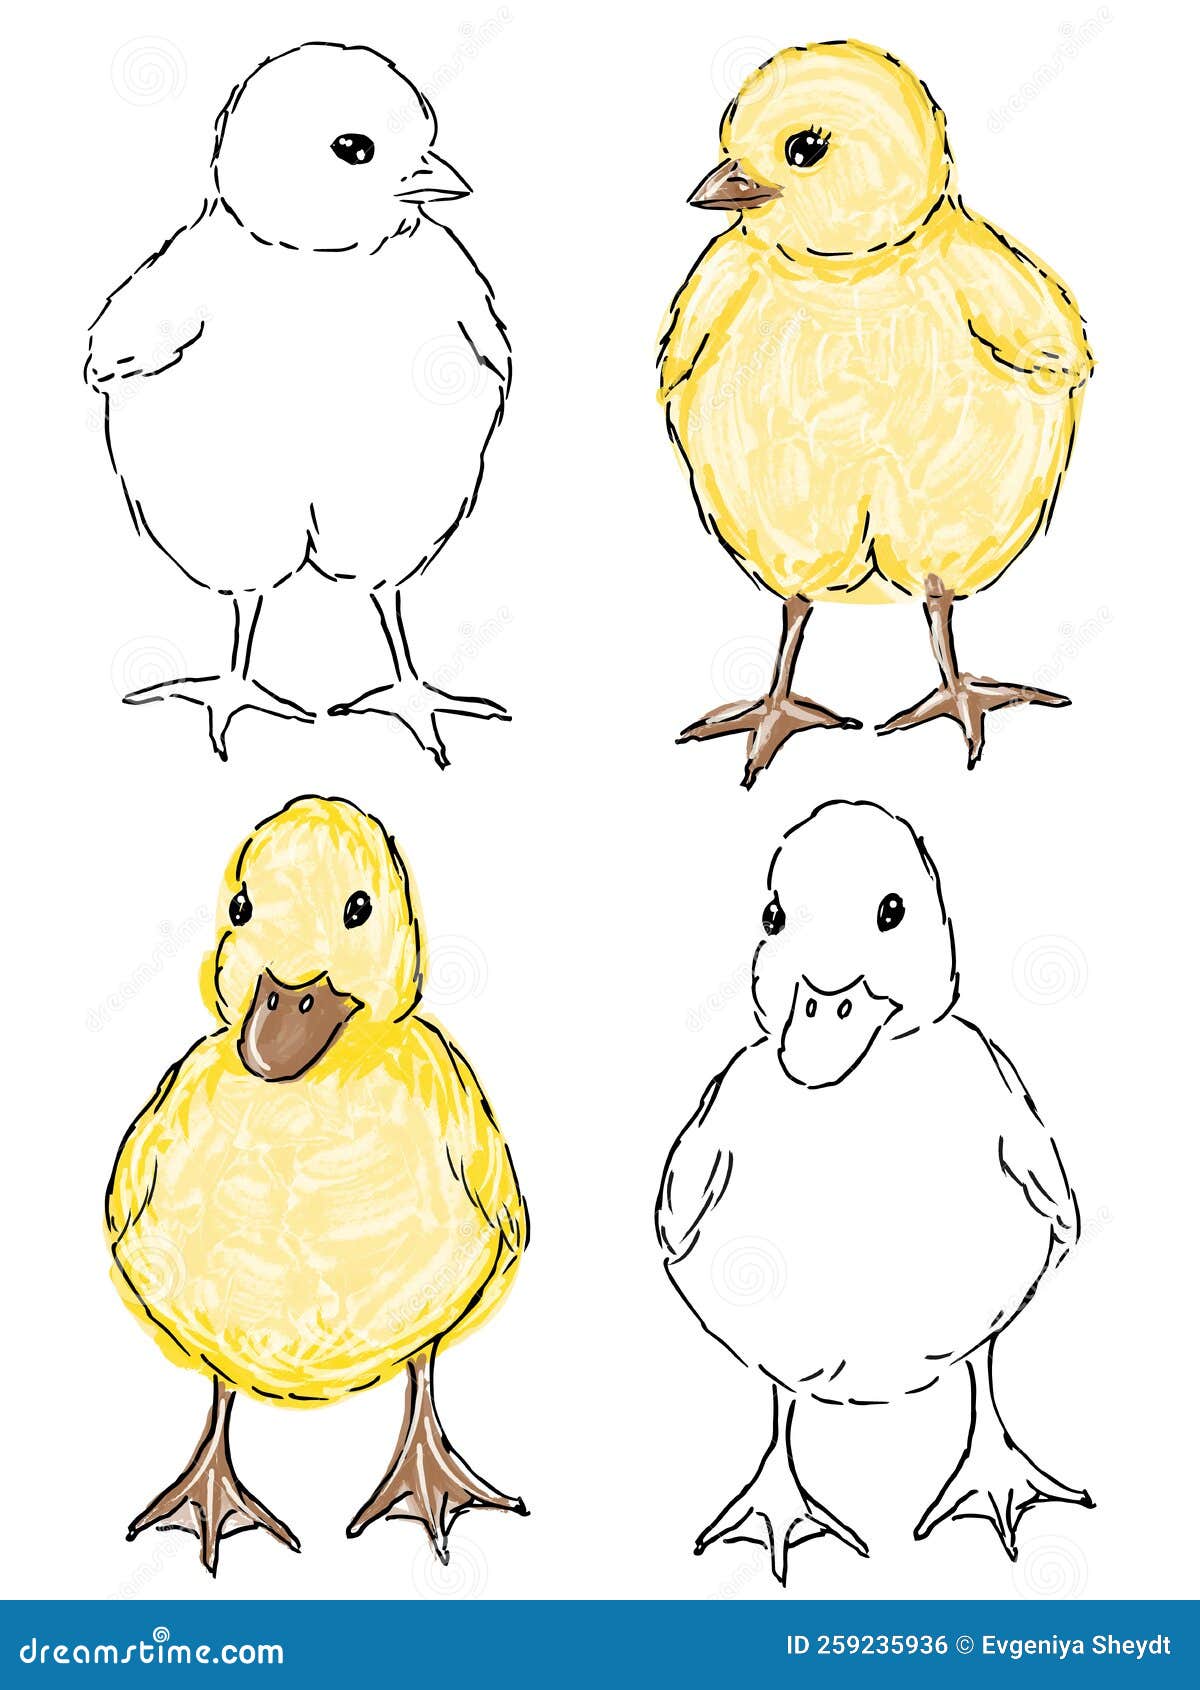 3,719 Baby Chick Sketch Images, Stock Photos, 3D objects, & Vectors |  Shutterstock